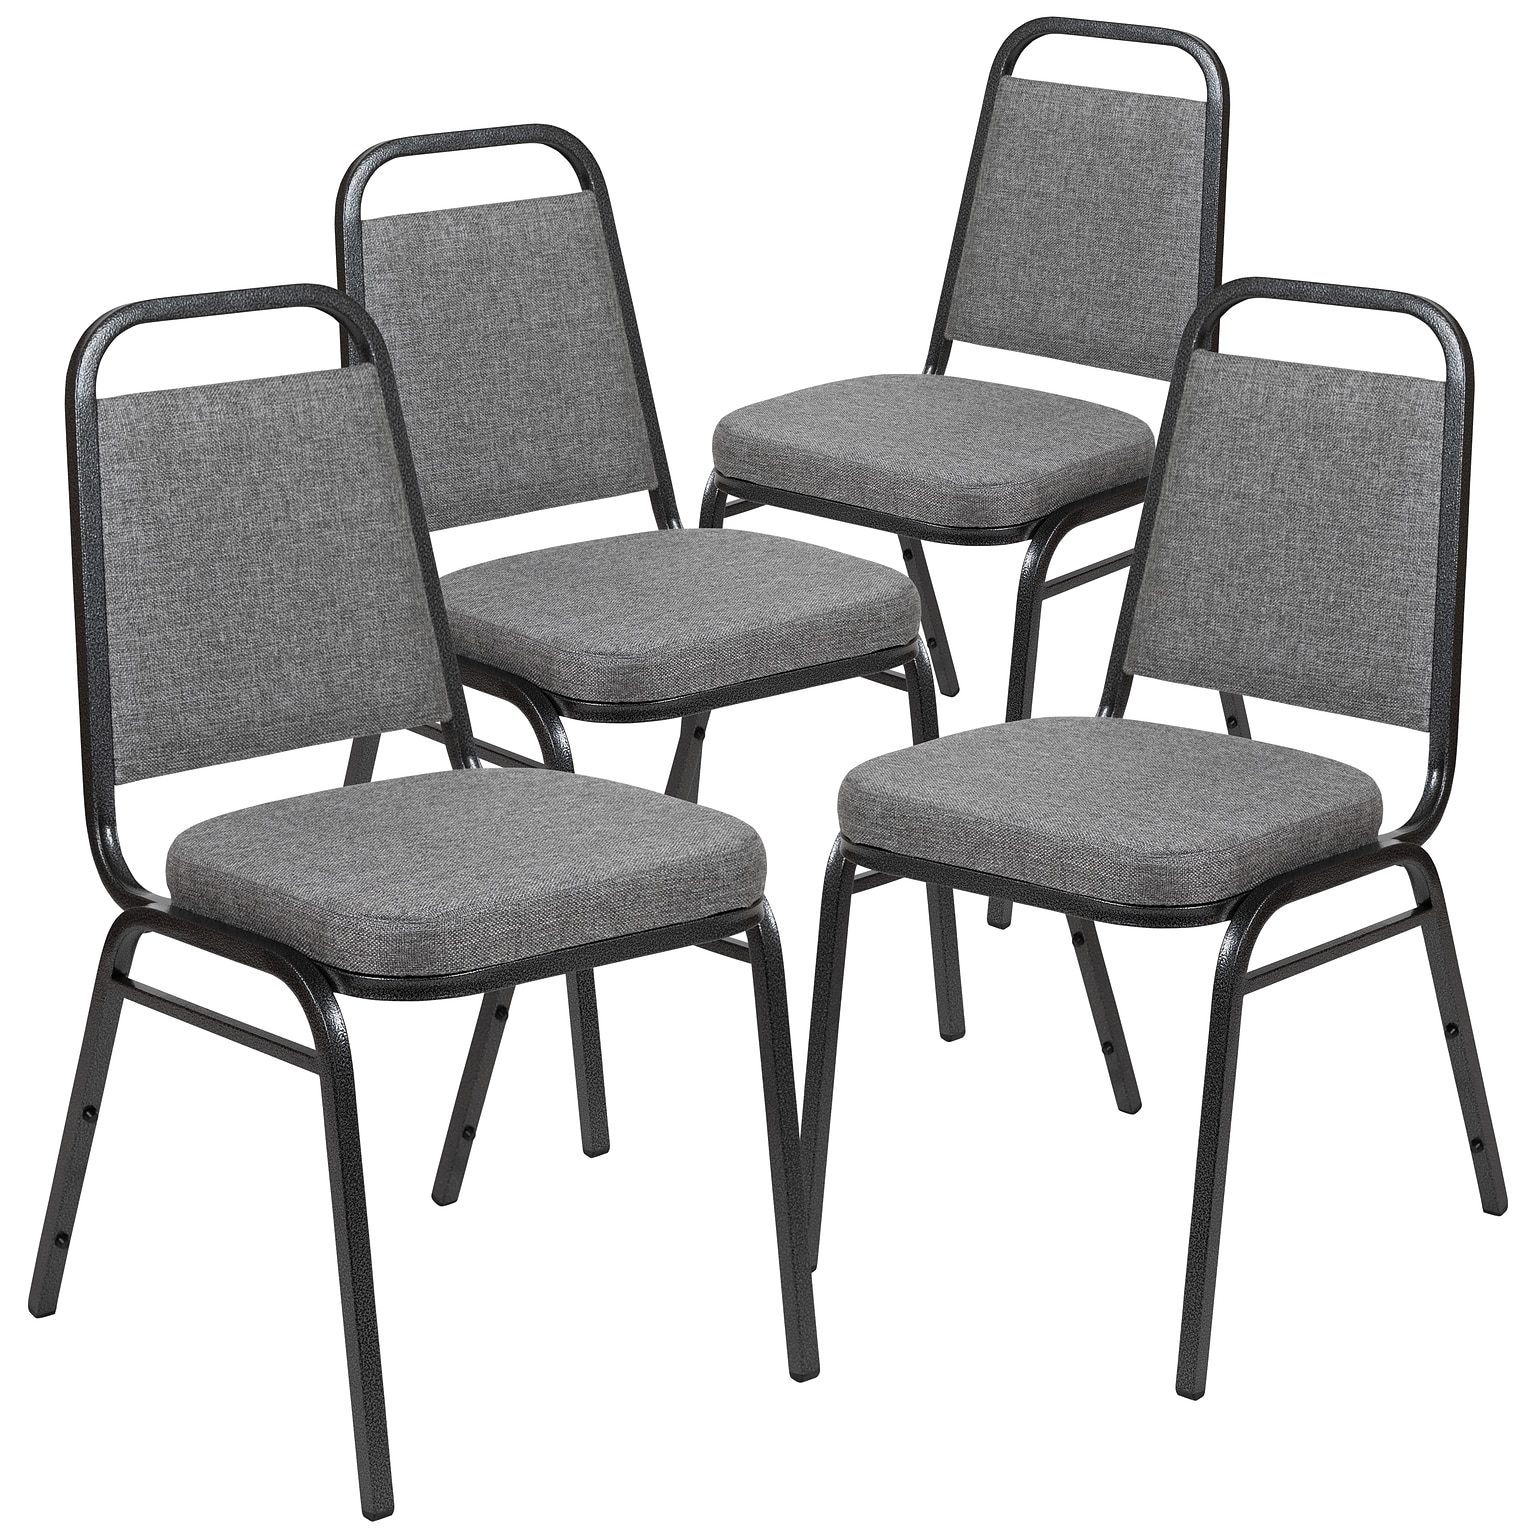 Flash Furniture HERCULES Series Fabric Banquet Stacking Chair, Gray/Silver Vein Frame, 4 Pack (4FDBHF1SVBCG)